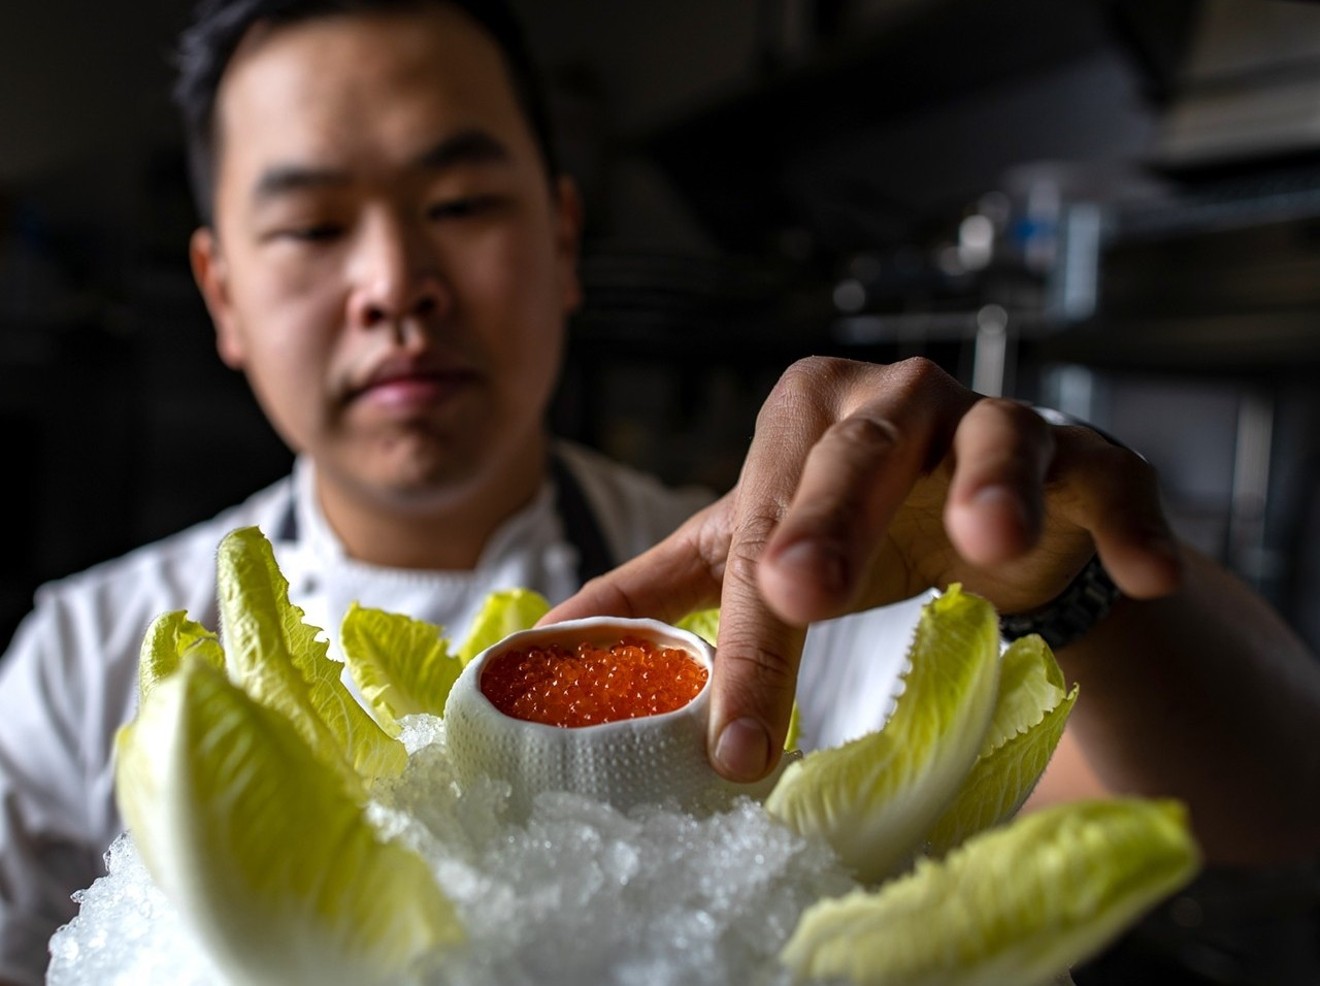 Buddha Lo credits his intense work with caviar as an ingredient with helping him win Top Chef season 19.